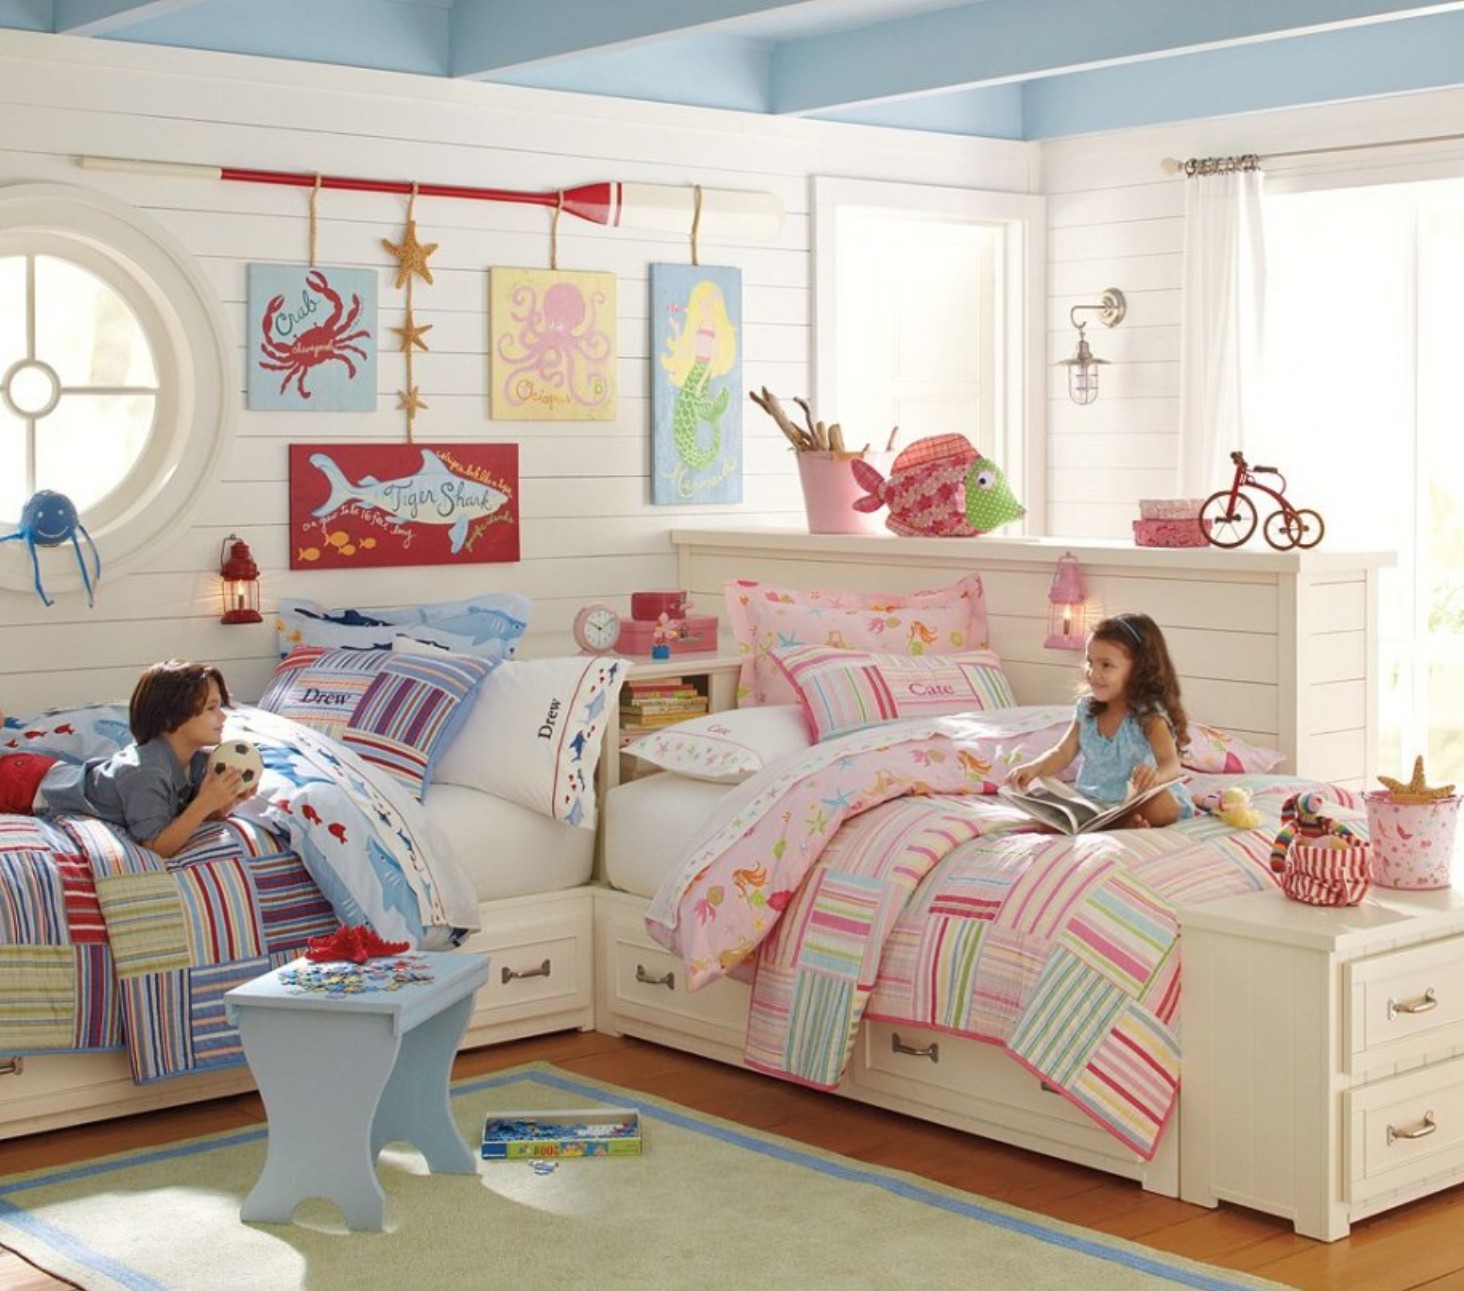 Kids Room Boy Charming Kids Room Furniture For Boy And Girl Design Ideas With Rustic White Wooden Bed Design And Relaxing White Wall Paint Colors Ides And Periwinkle Ceiling Also Creative Storage Under Bed Idea Furniture Composing The Special Type Of Kids Room Furniture